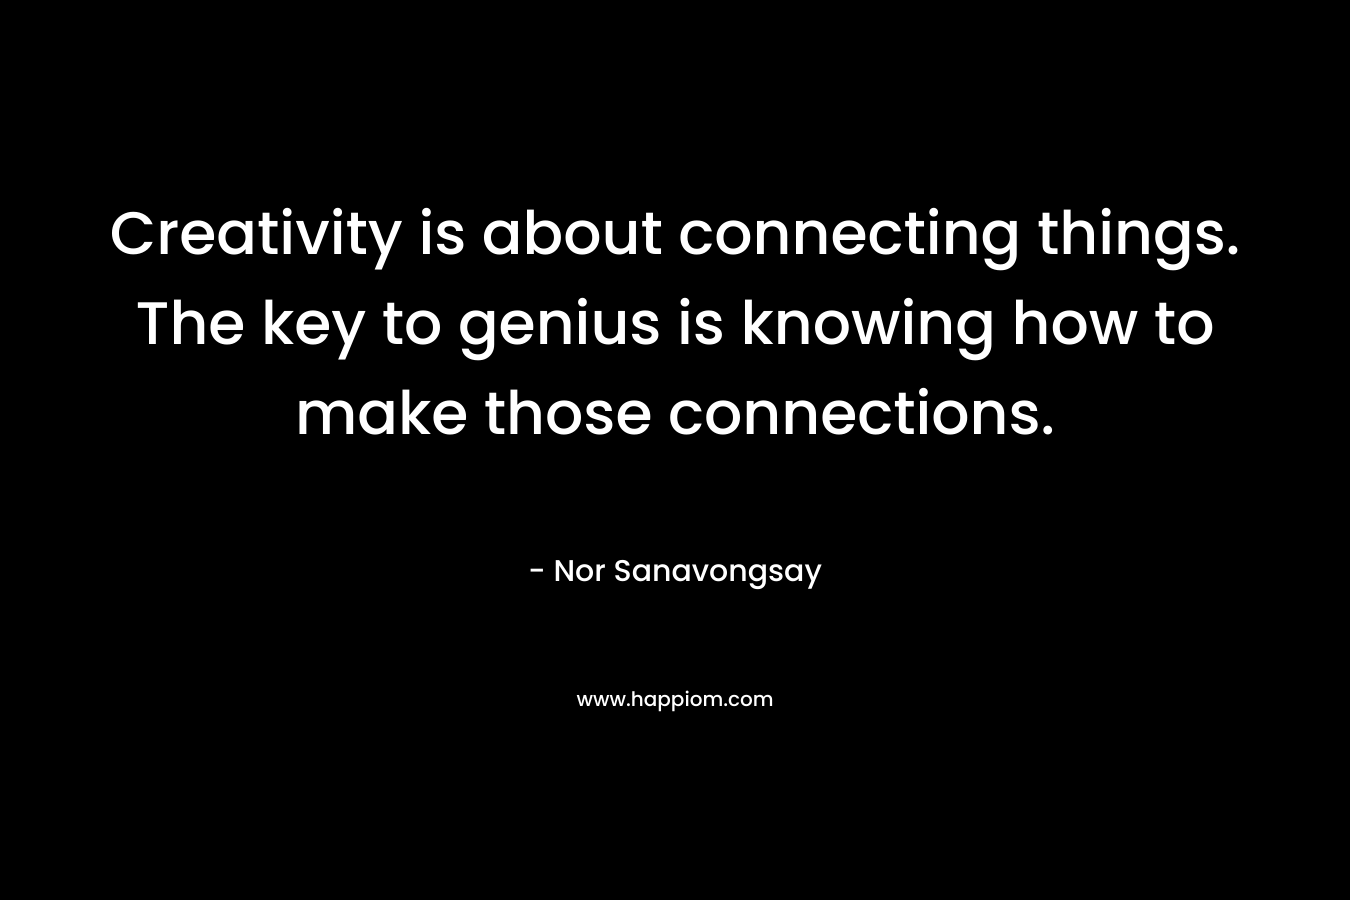 Creativity is about connecting things. The key to genius is knowing how to make those connections.